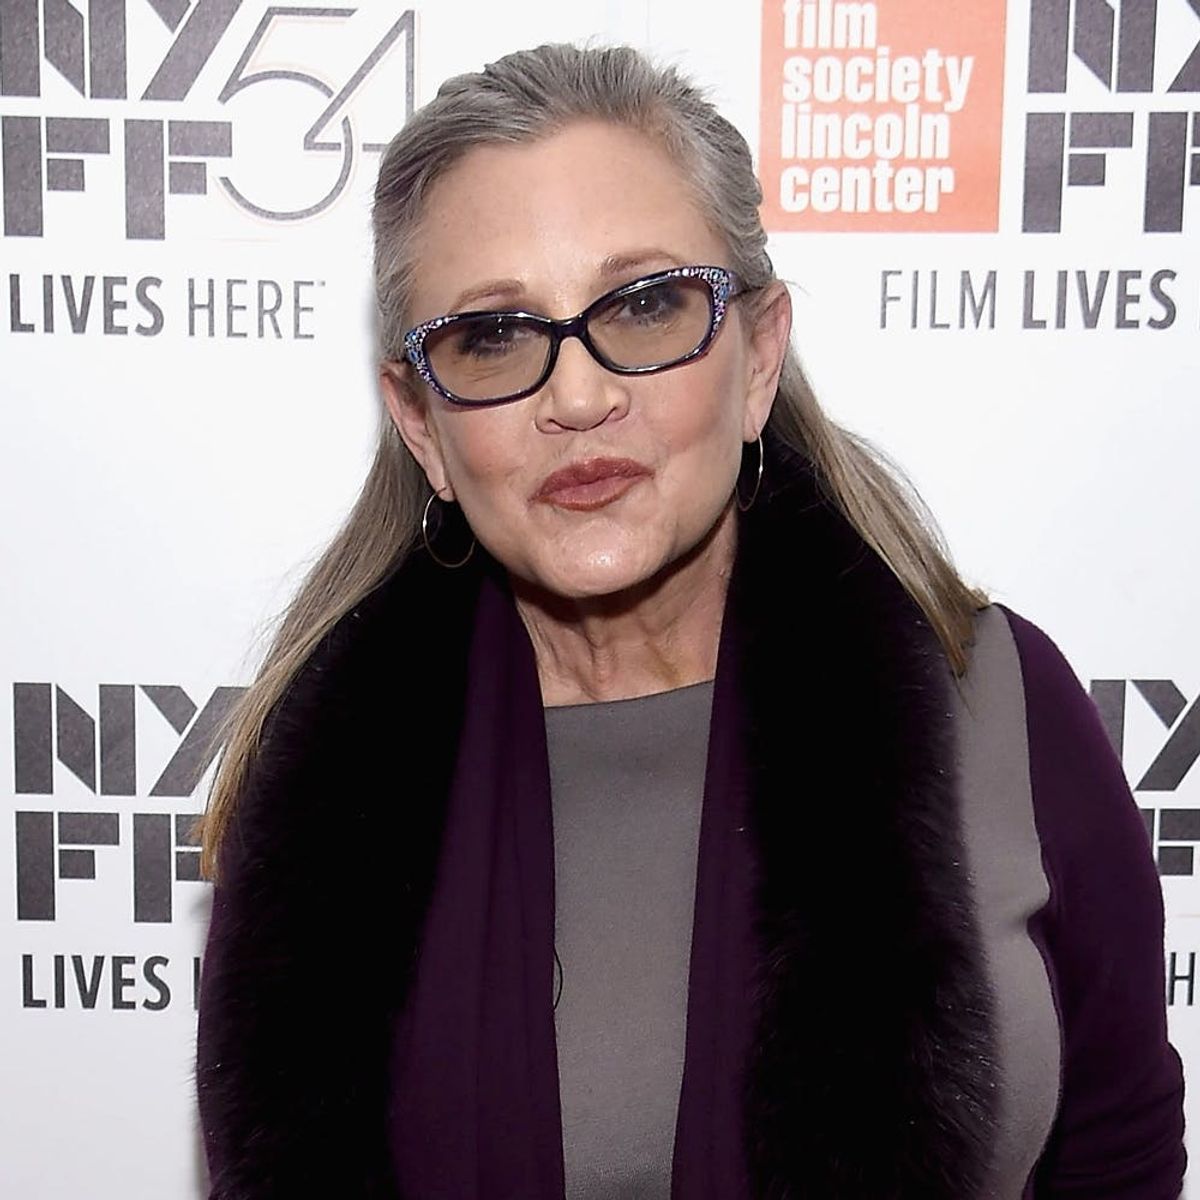 Celebs React to the Heartbreaking News of Carrie Fisher’s Passing